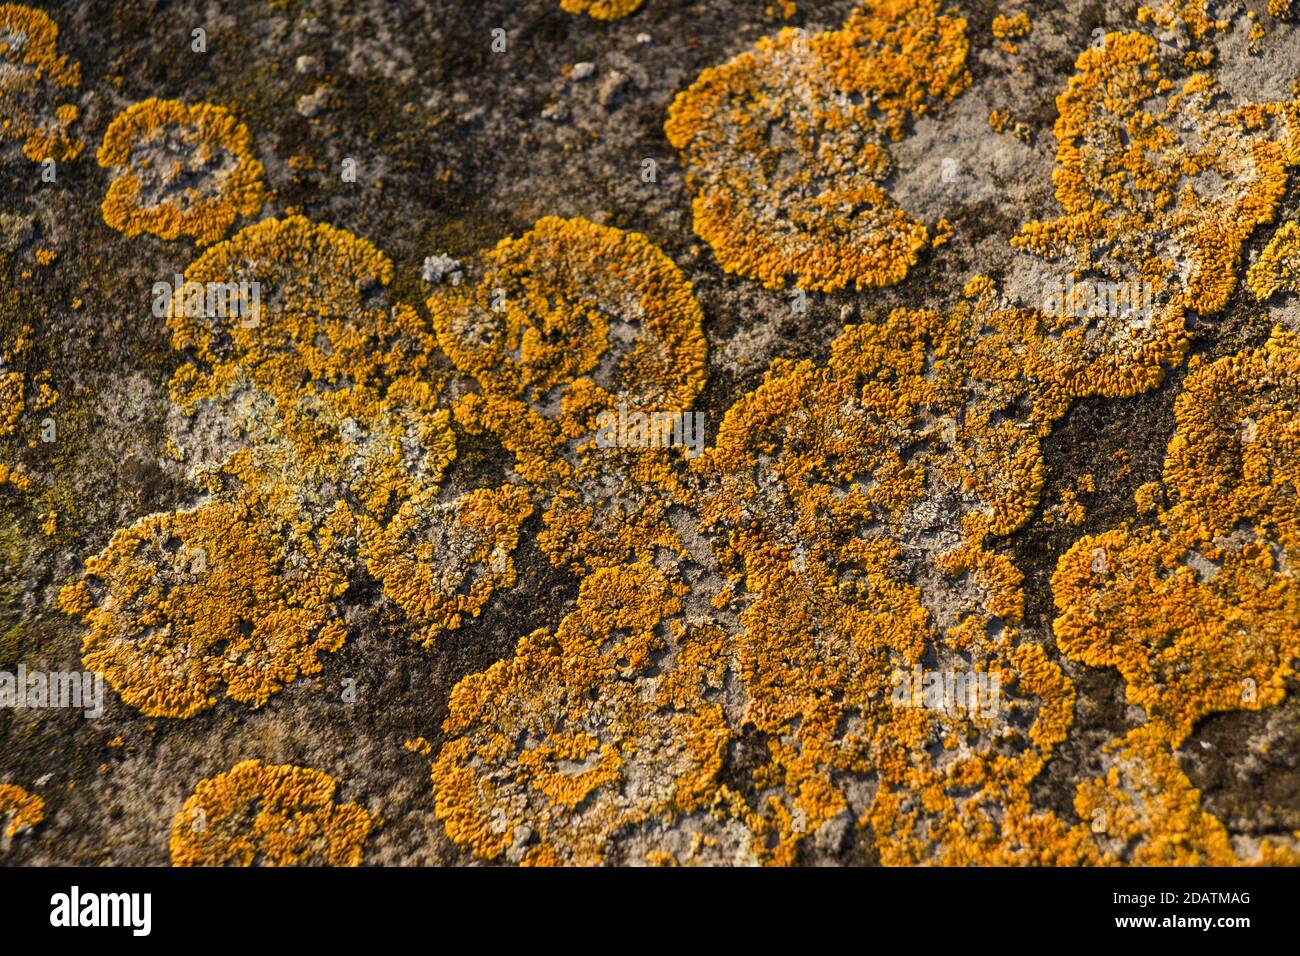 The common yellow lichen, Candelariella vitelline, grows on many surface types ranging from wood to rock and masonry. Ranging from a yellow to orange Stock Photo